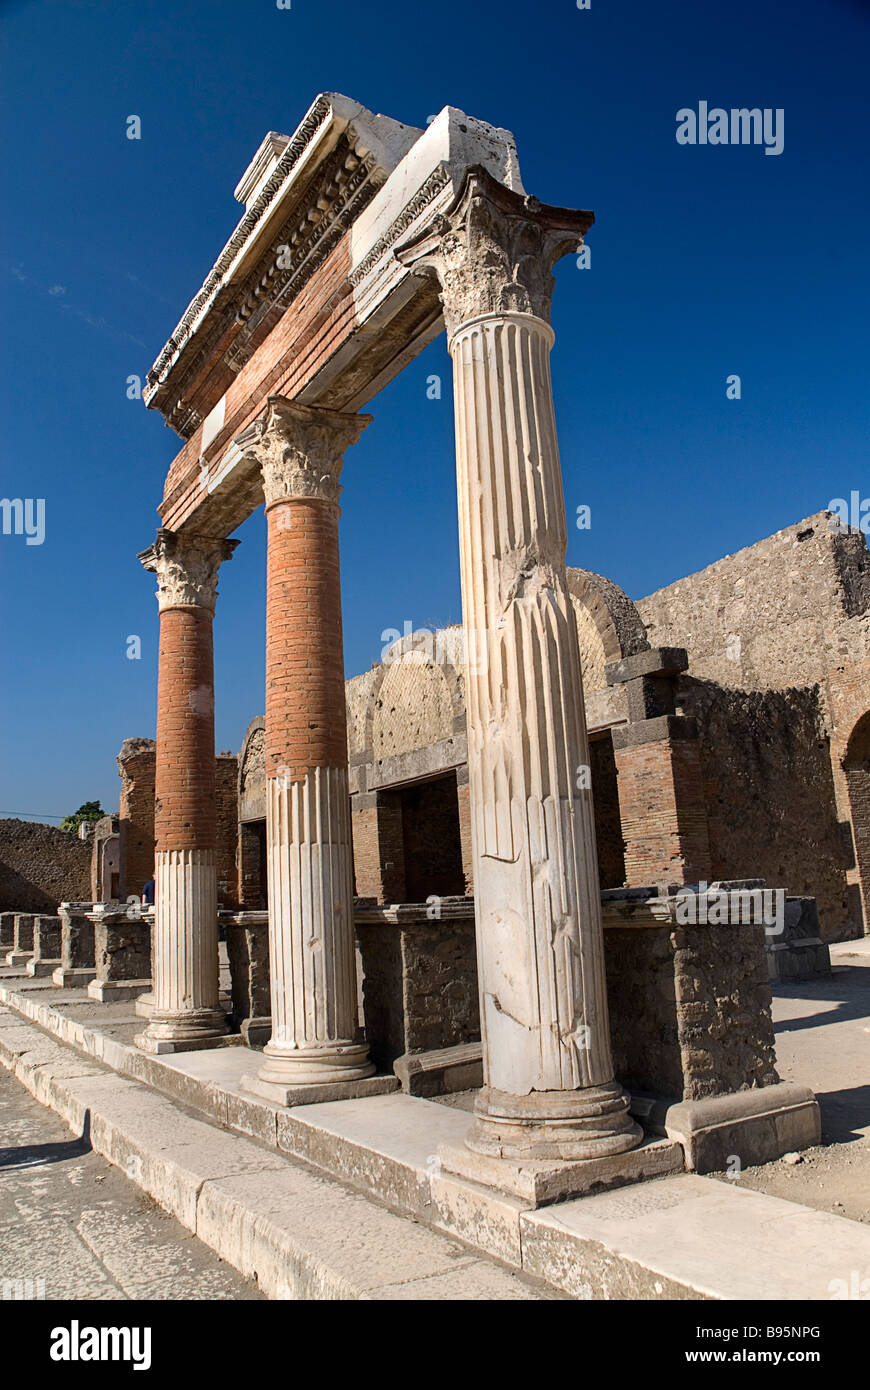 Italy, Campania, Napoli, Pompeii. Portico in front of the Macellum in the north eastern corner of the Forum. Stock Photo